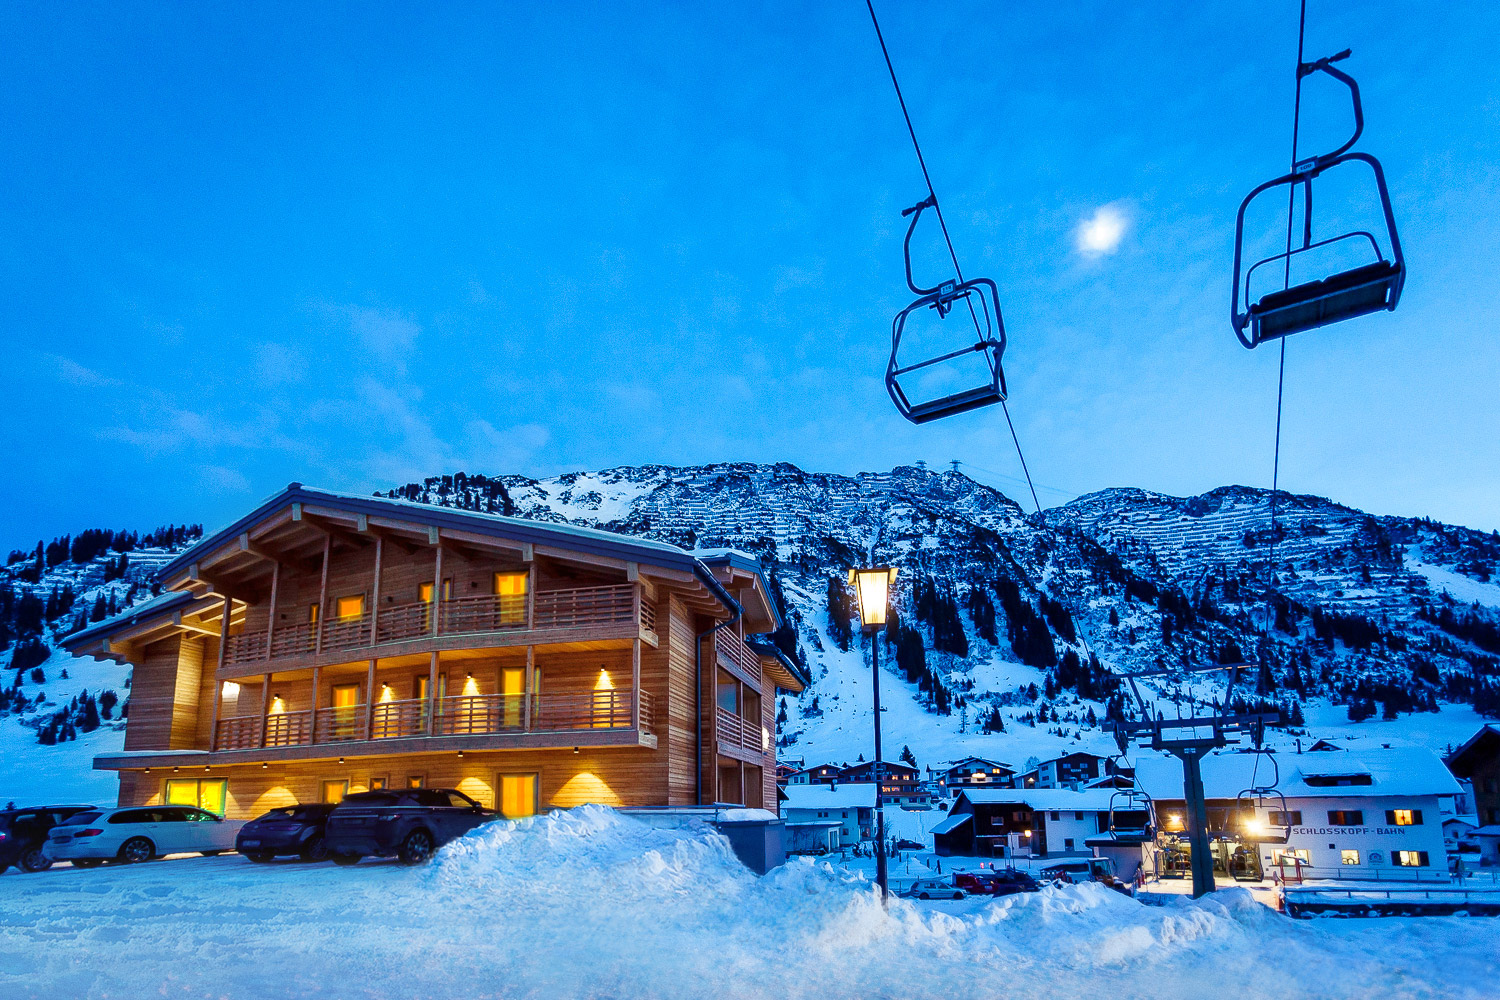 Enjoy an unforgettable stay at the Apart-Hotel Laurus in Lech am Arlberg